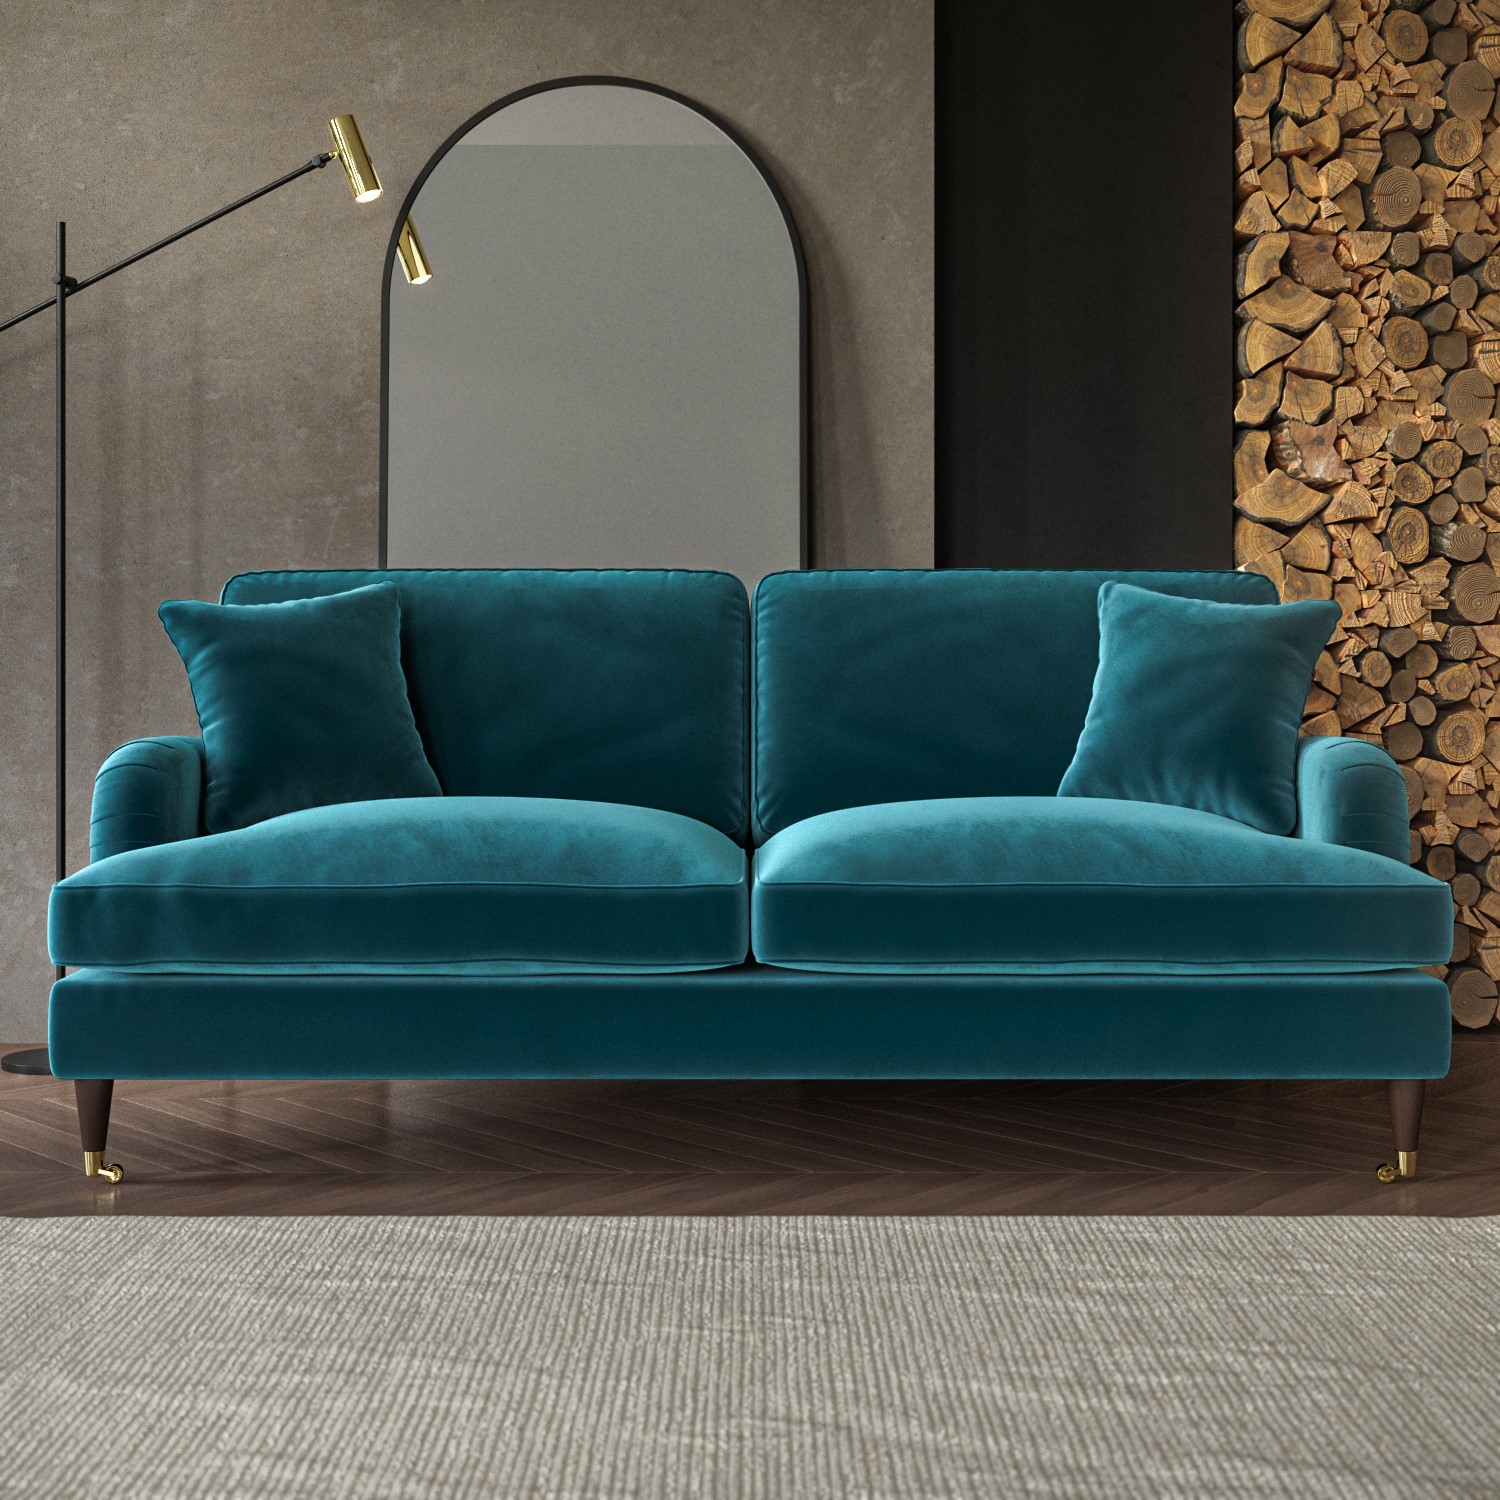 Read more about Teal velvet 3 seater sofa payton